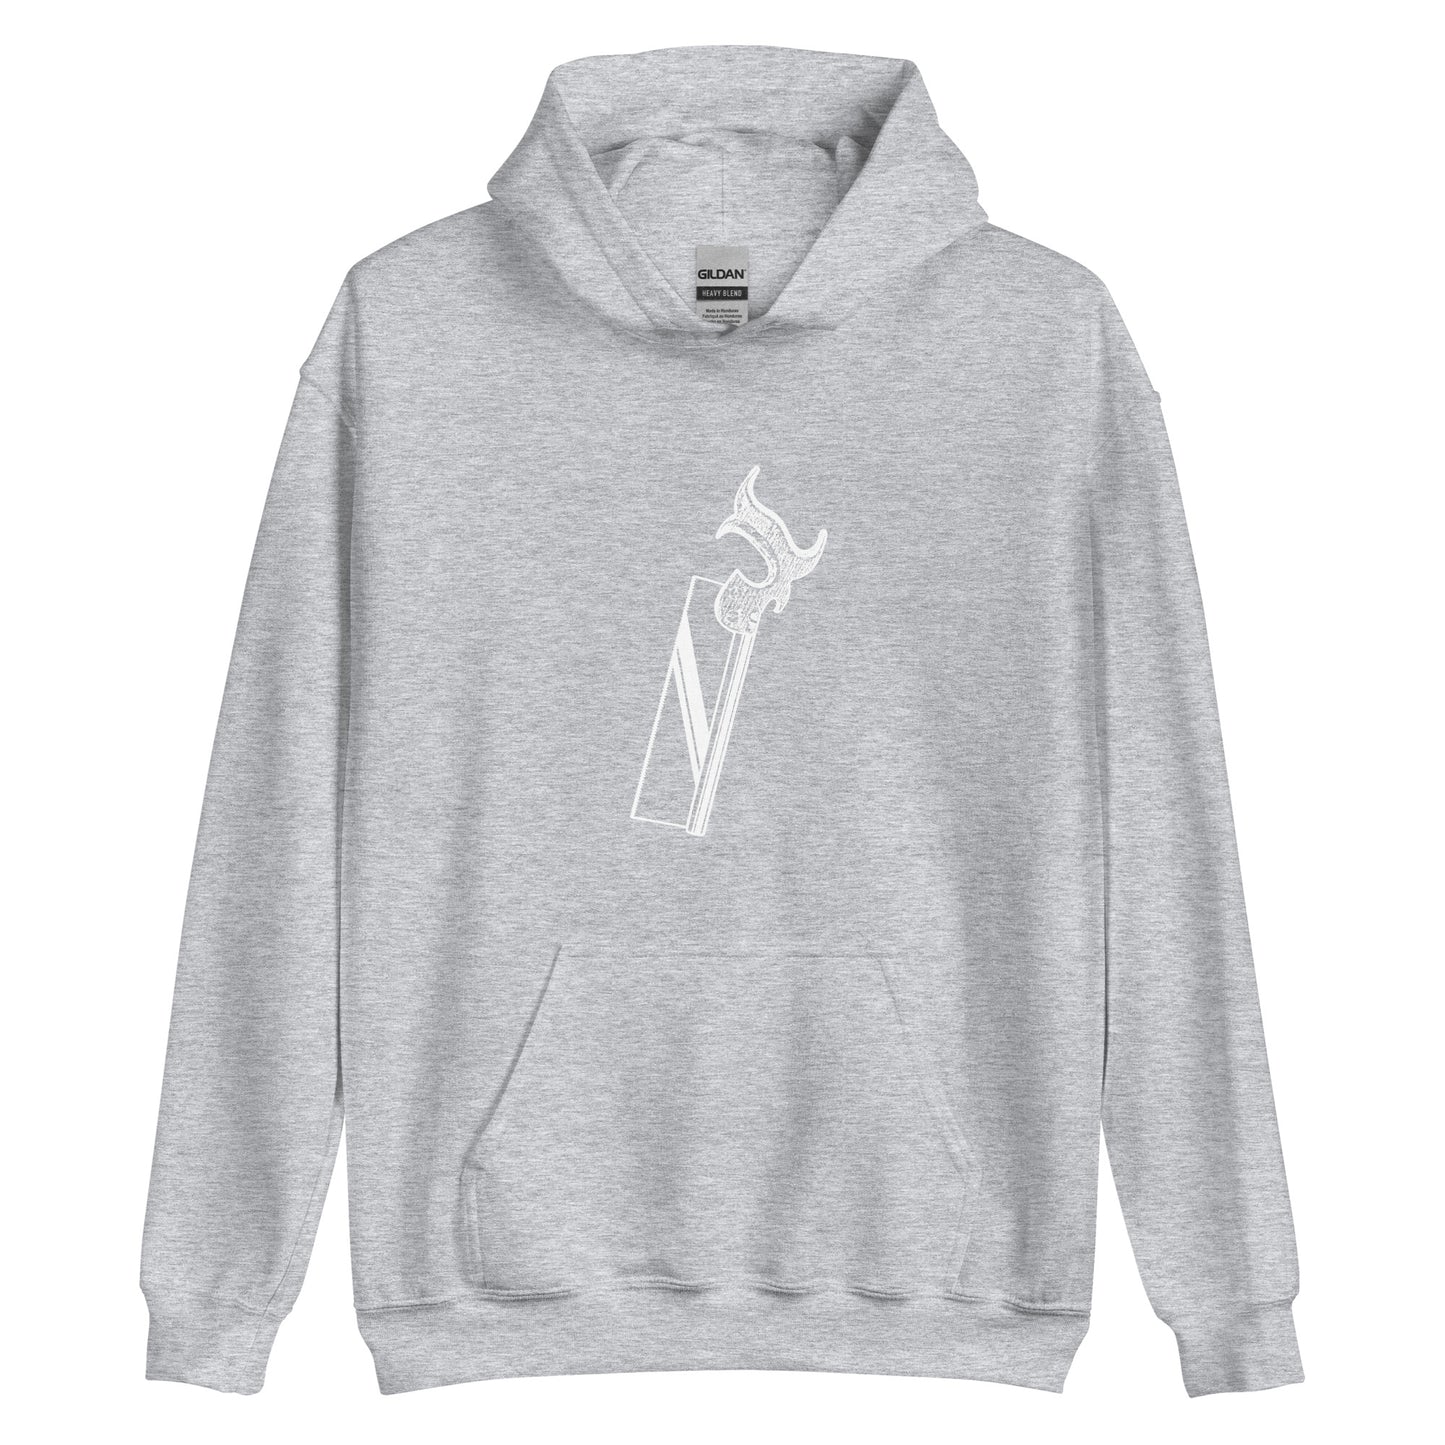 "Dovetail Saw" Unisex Hoodie for Woodworkers (Multiple Colors)